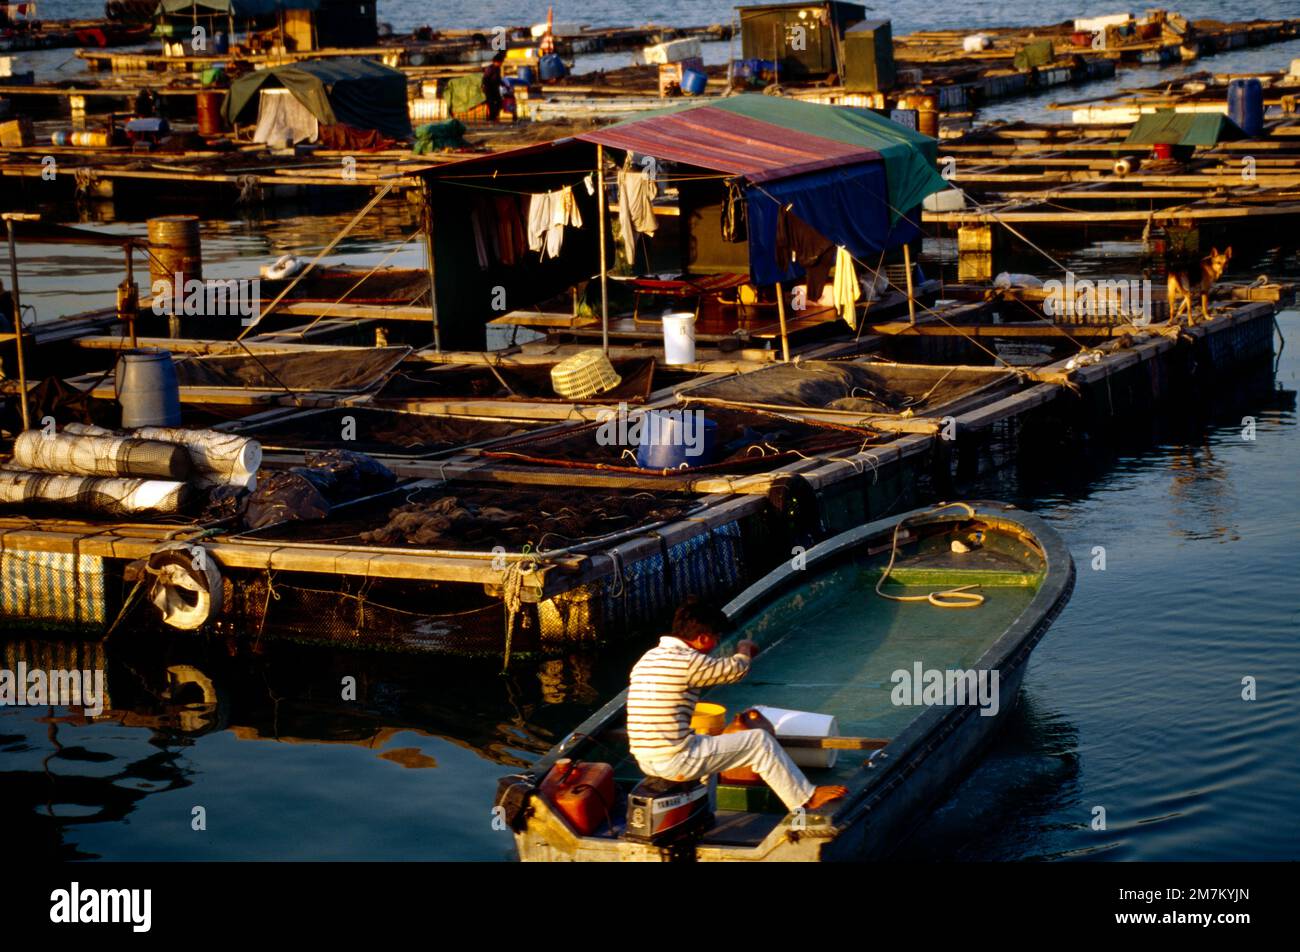 Cheung Chau Hong Kong Outlying Islands Prawn Beds In Harbour Stock Photo